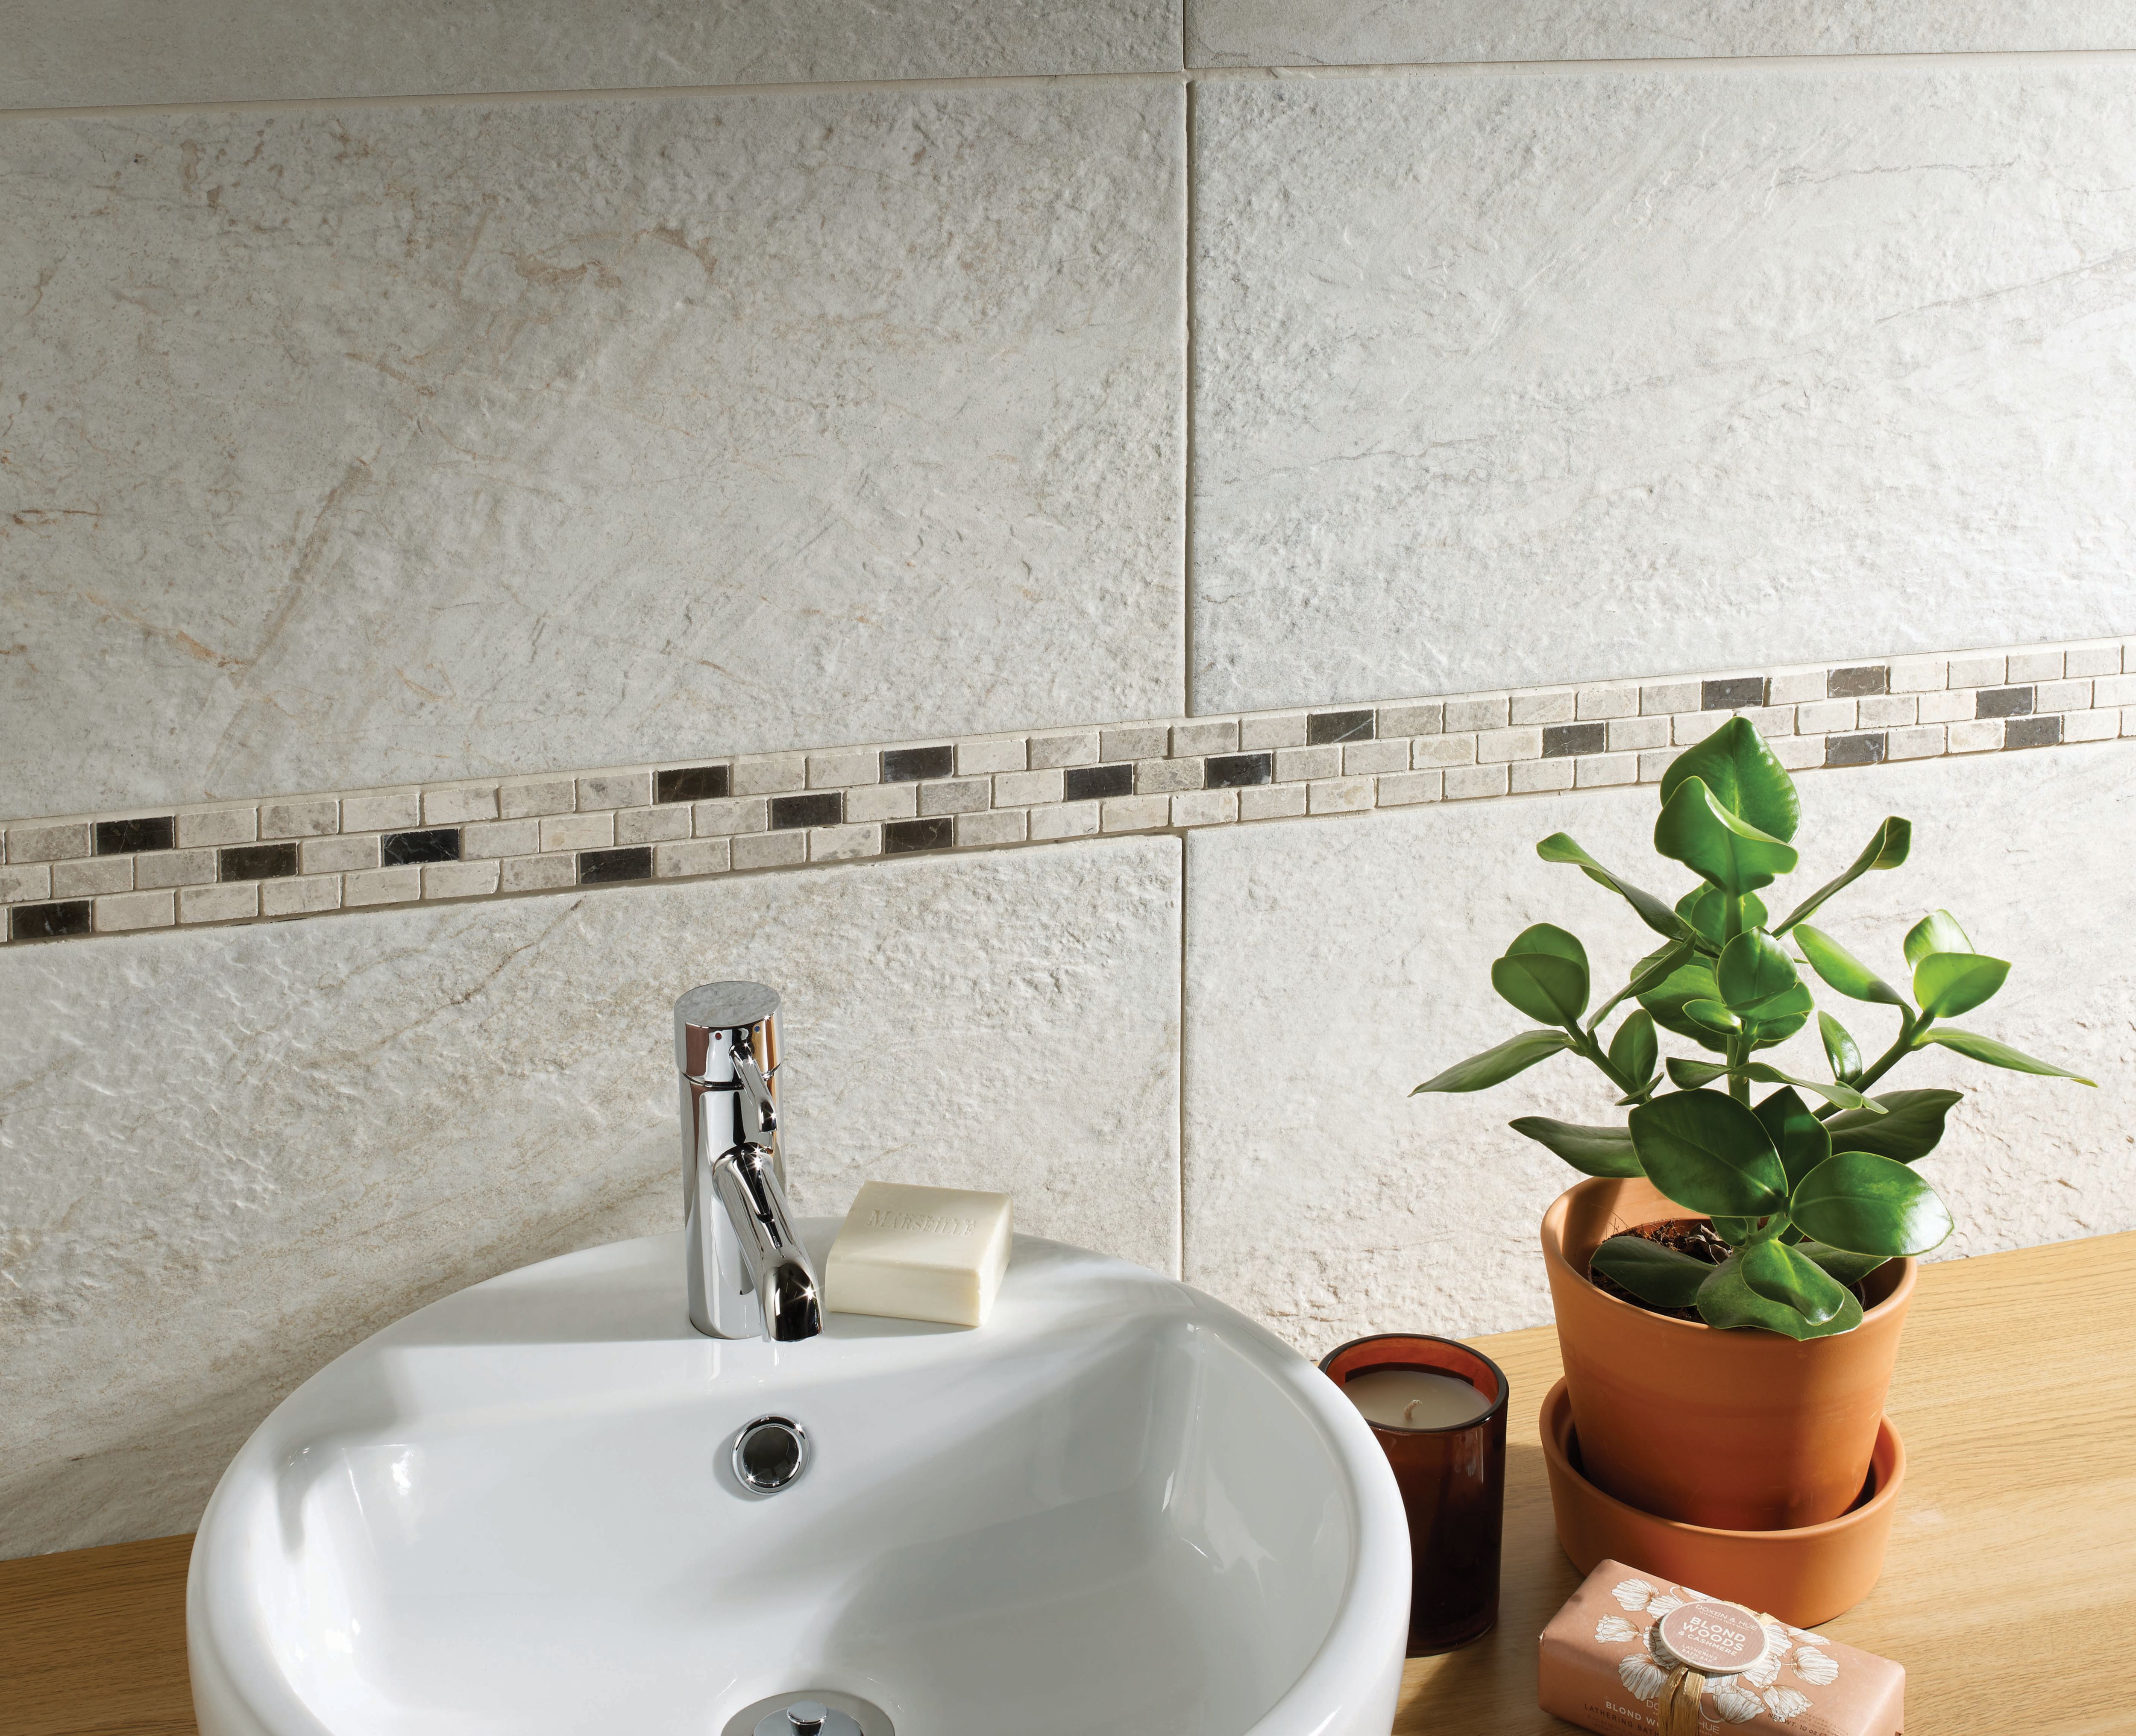 Wickes Silver Polished Marble Brick Mosaic Tile Sheet - 305 x 305mm